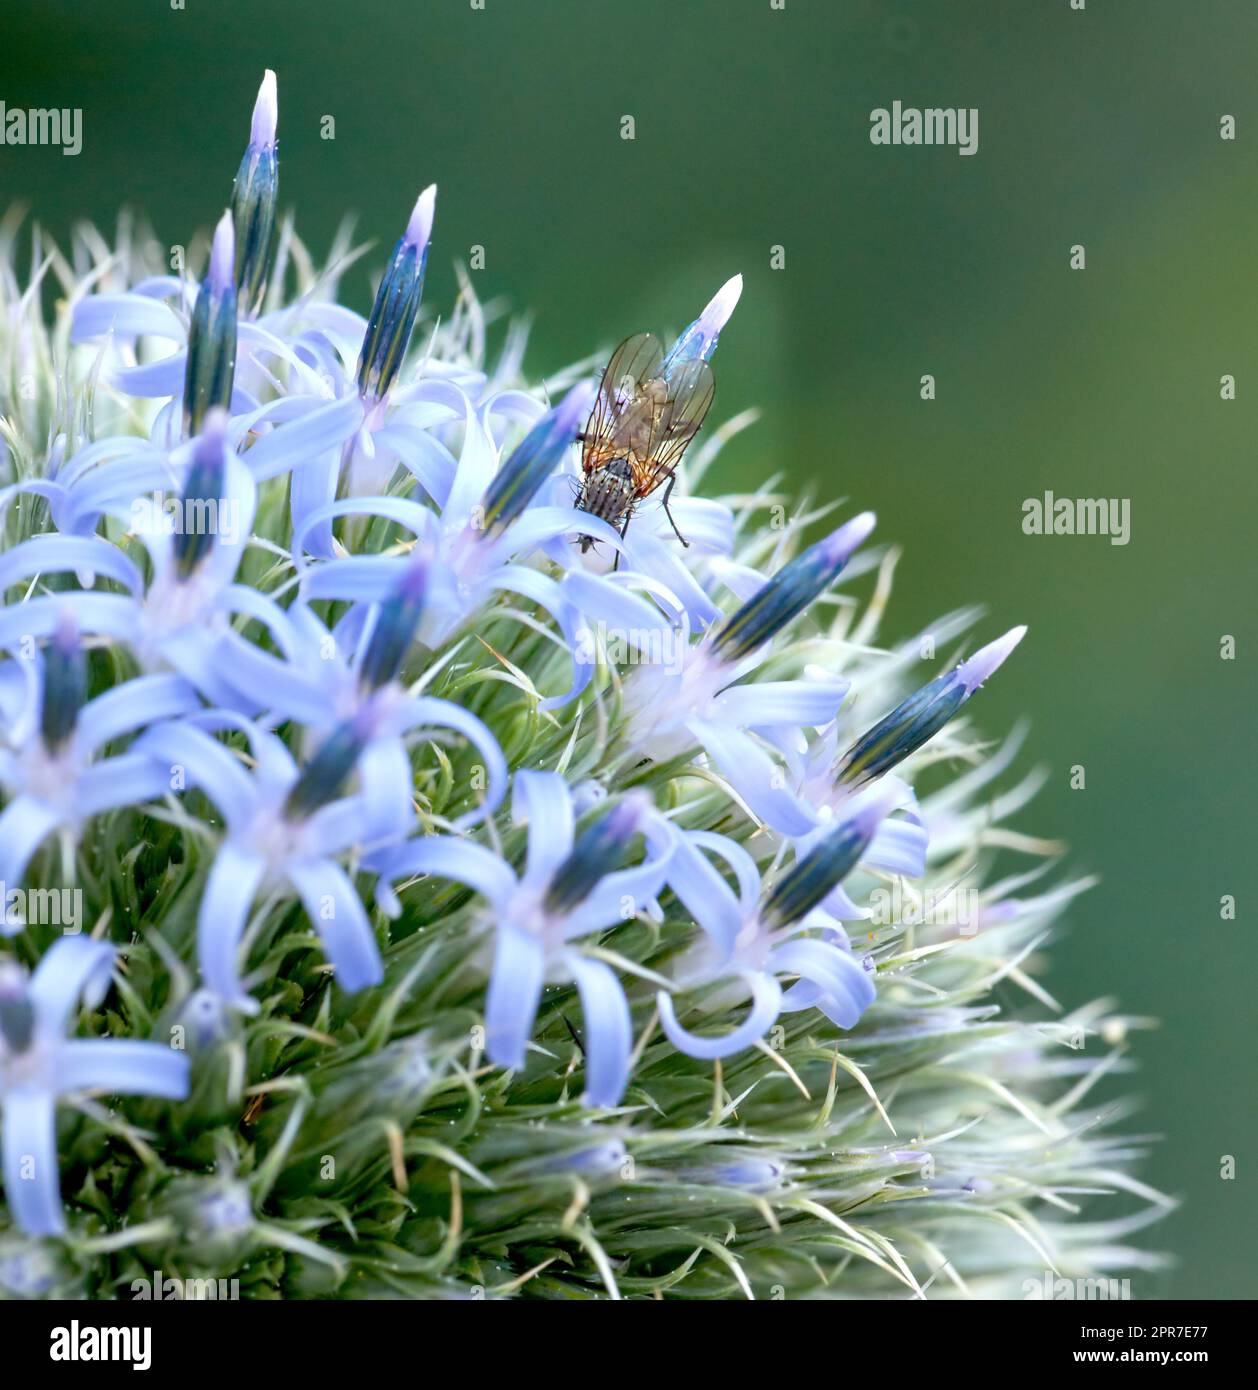 Closeup of blue globe thistle plant being pollinated by bees in a garden during summer. Botany growing on a green field in the countryside. Zoom of wildflowers blossoming with insects in a meadow Stock Photo